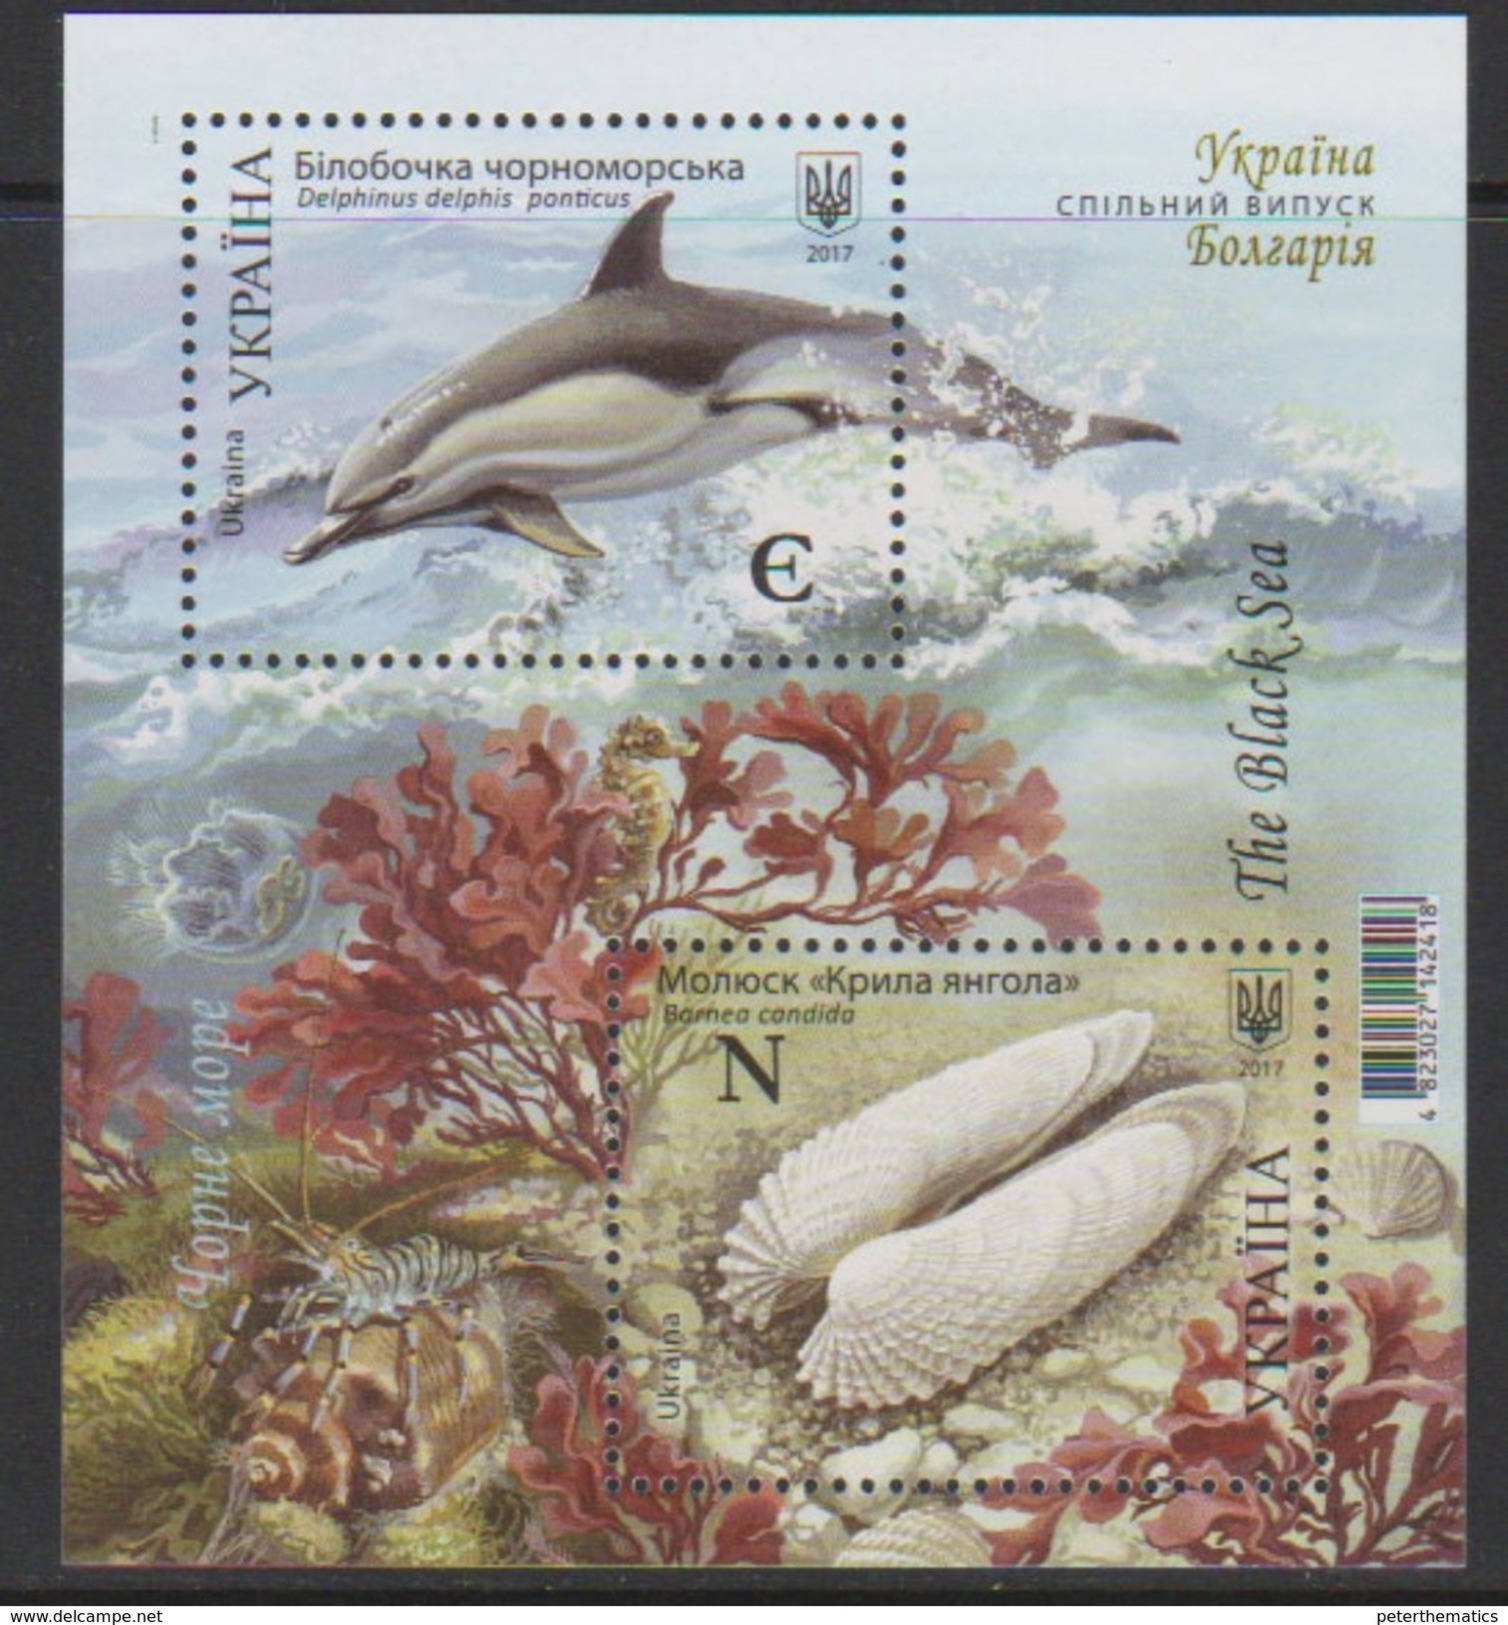 UKRAINE, 2017, MNH, MARINE LIFE, JOINT ISSUE WITH BULGARIA, DOLPHINS, SHELLS, S/SHEET - Dolphins